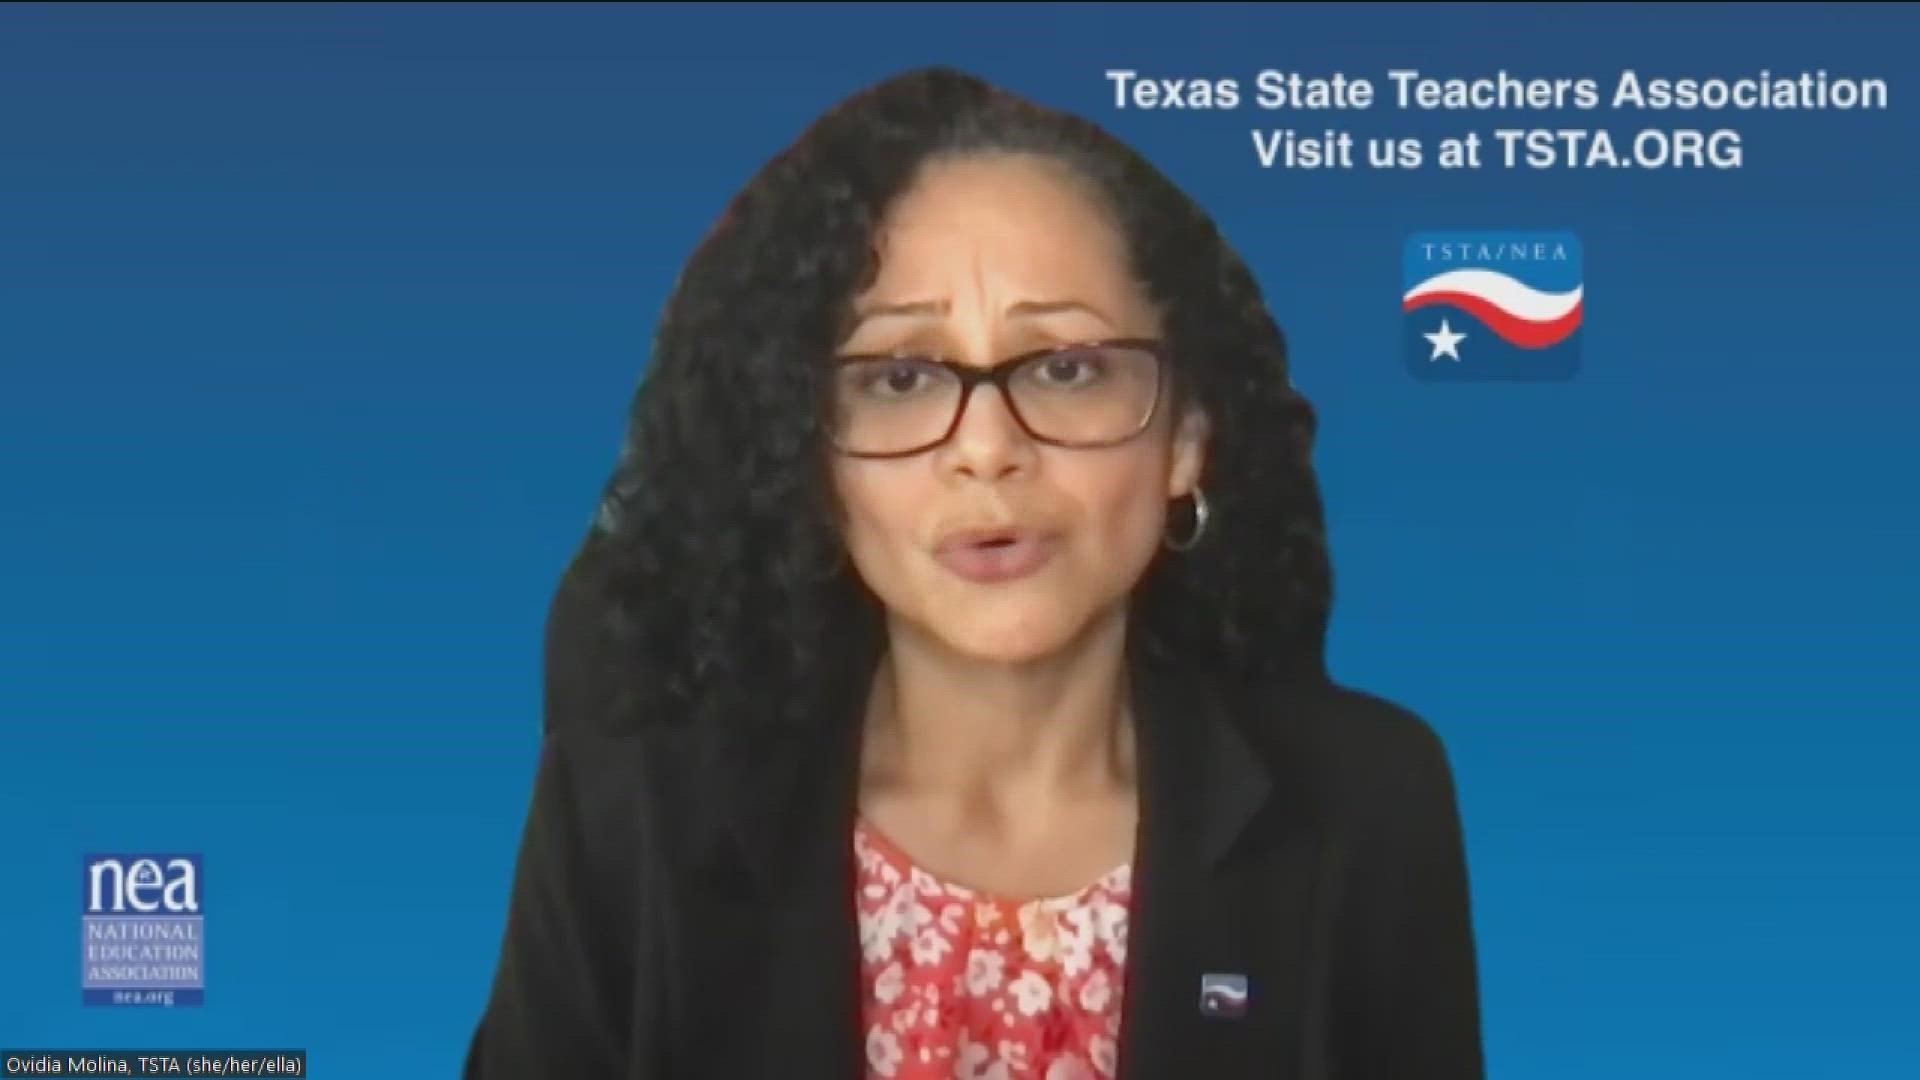 The Texas State Teachers Association called on Texas lawmakers to focus on gun reform after the 77-page Uvalde shooting report.